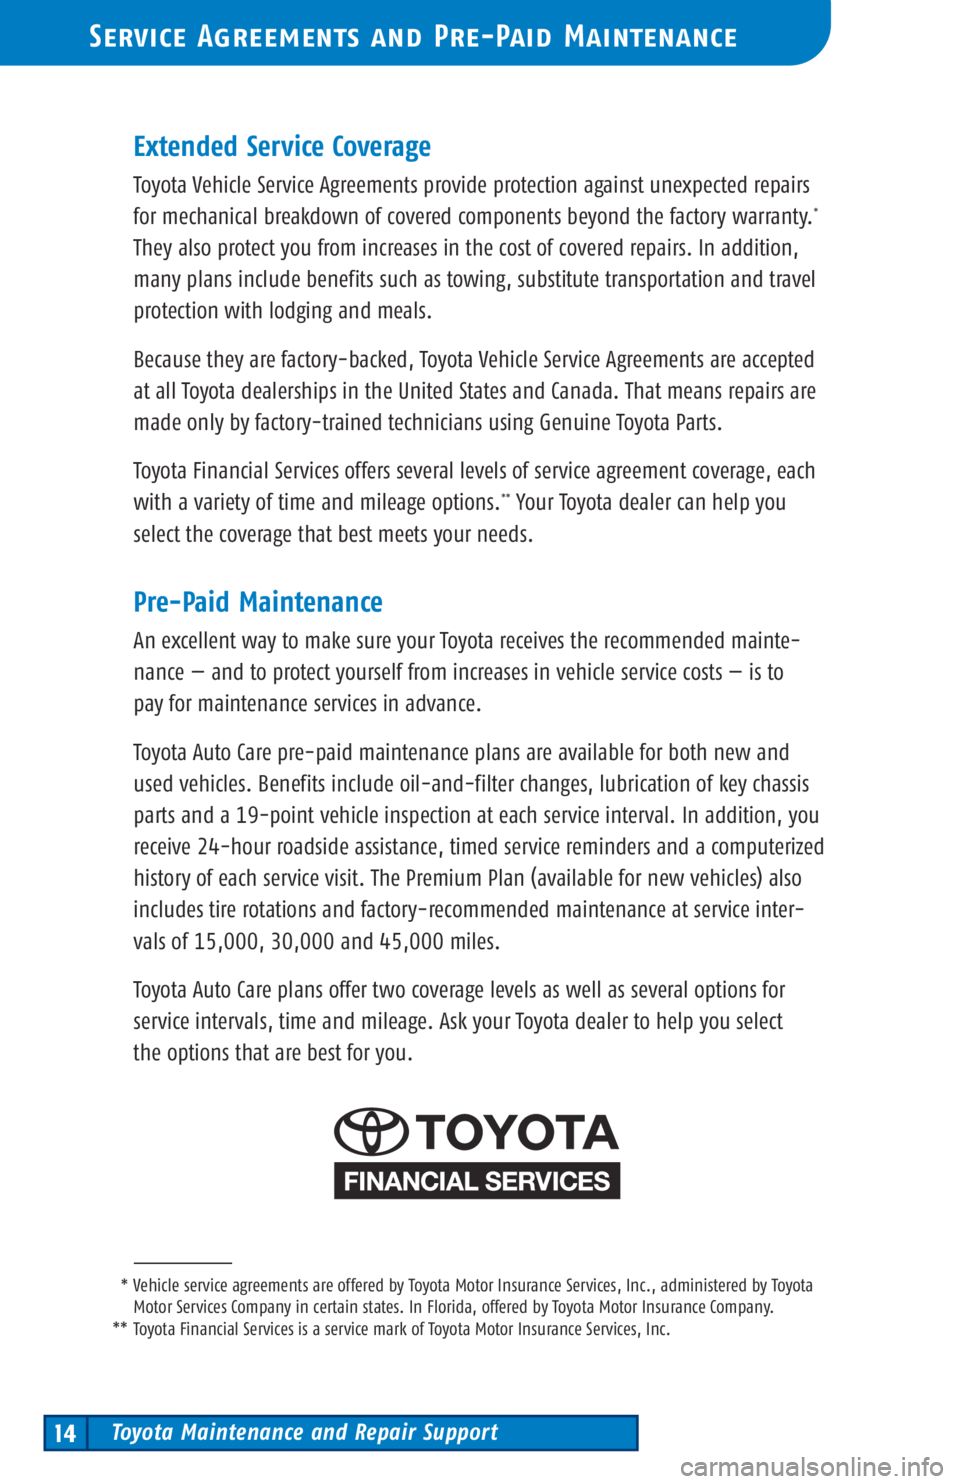 TOYOTA SOLARA 2003  Warranties & Maintenance Guides (in English) Toyota Maintenance and Repair Support14
Service Agreements and Pre-Paid Maintenance
Extended Service Coverage
Toyota Vehicle Service Agreements provide protection against unexpected repairs
formechani